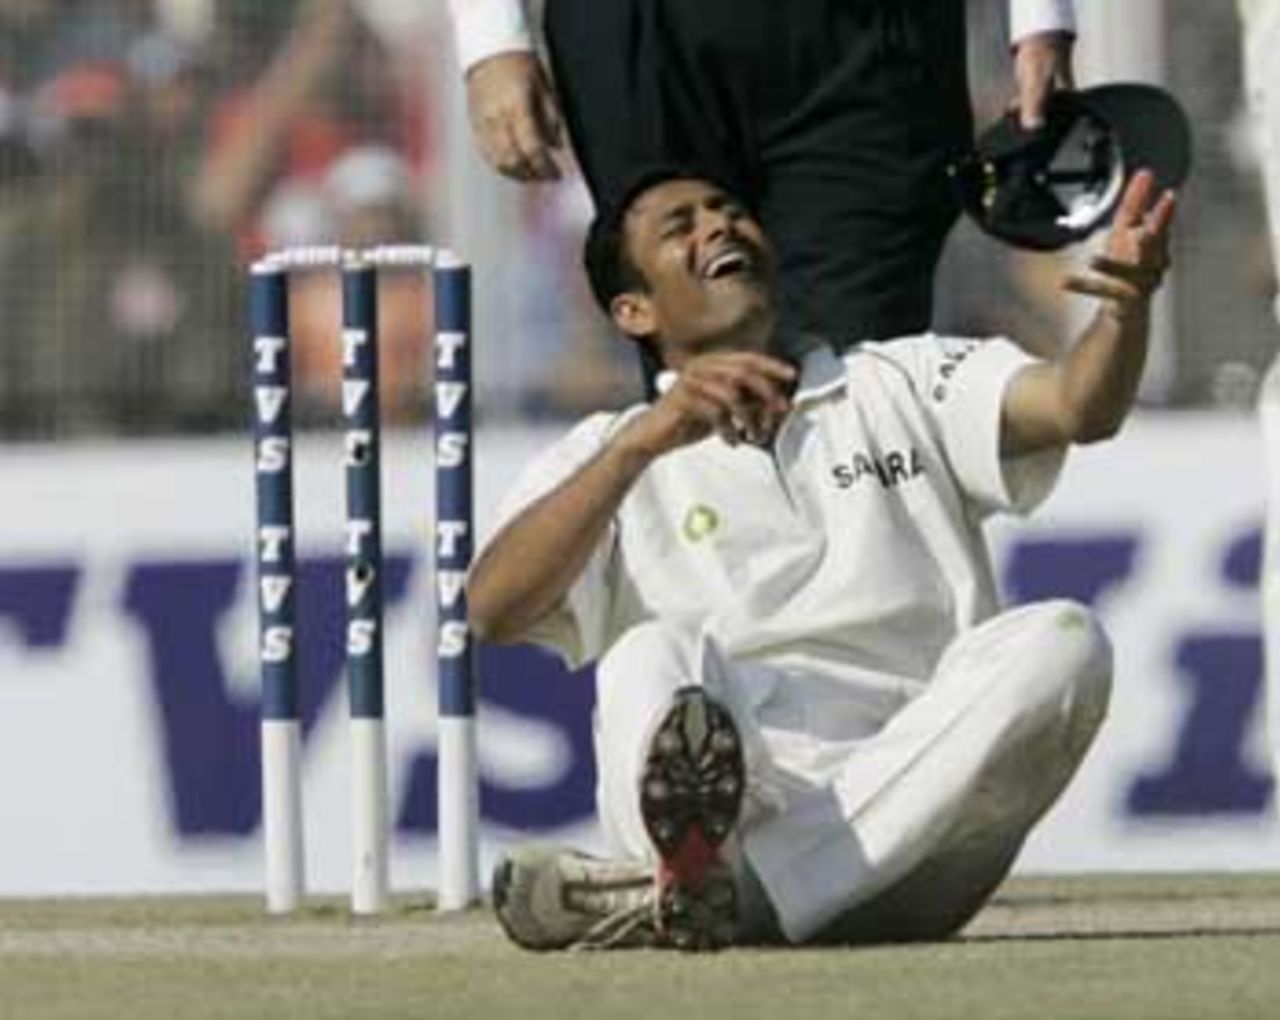 The joy on Anil Kumble's face, after he plucked a surprise catch, tells a story, India v Pakistan, 1st Test, Mohali, 5th day, March 12, 2005